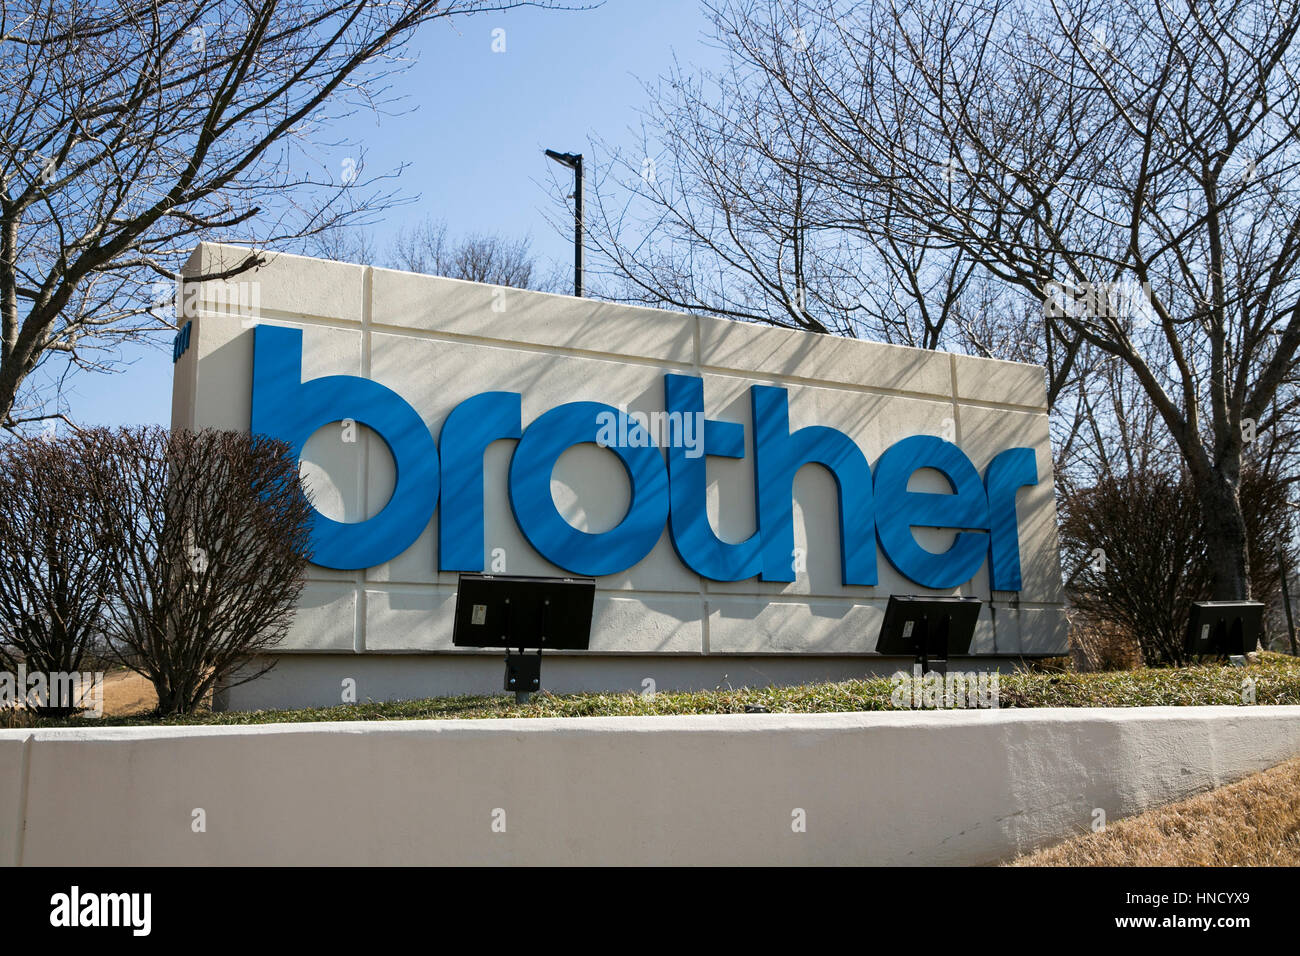 A logo sign outside of a facility occupied by Brother USA in Bartlett, Tennessee on February 5, 2017. Stock Photo